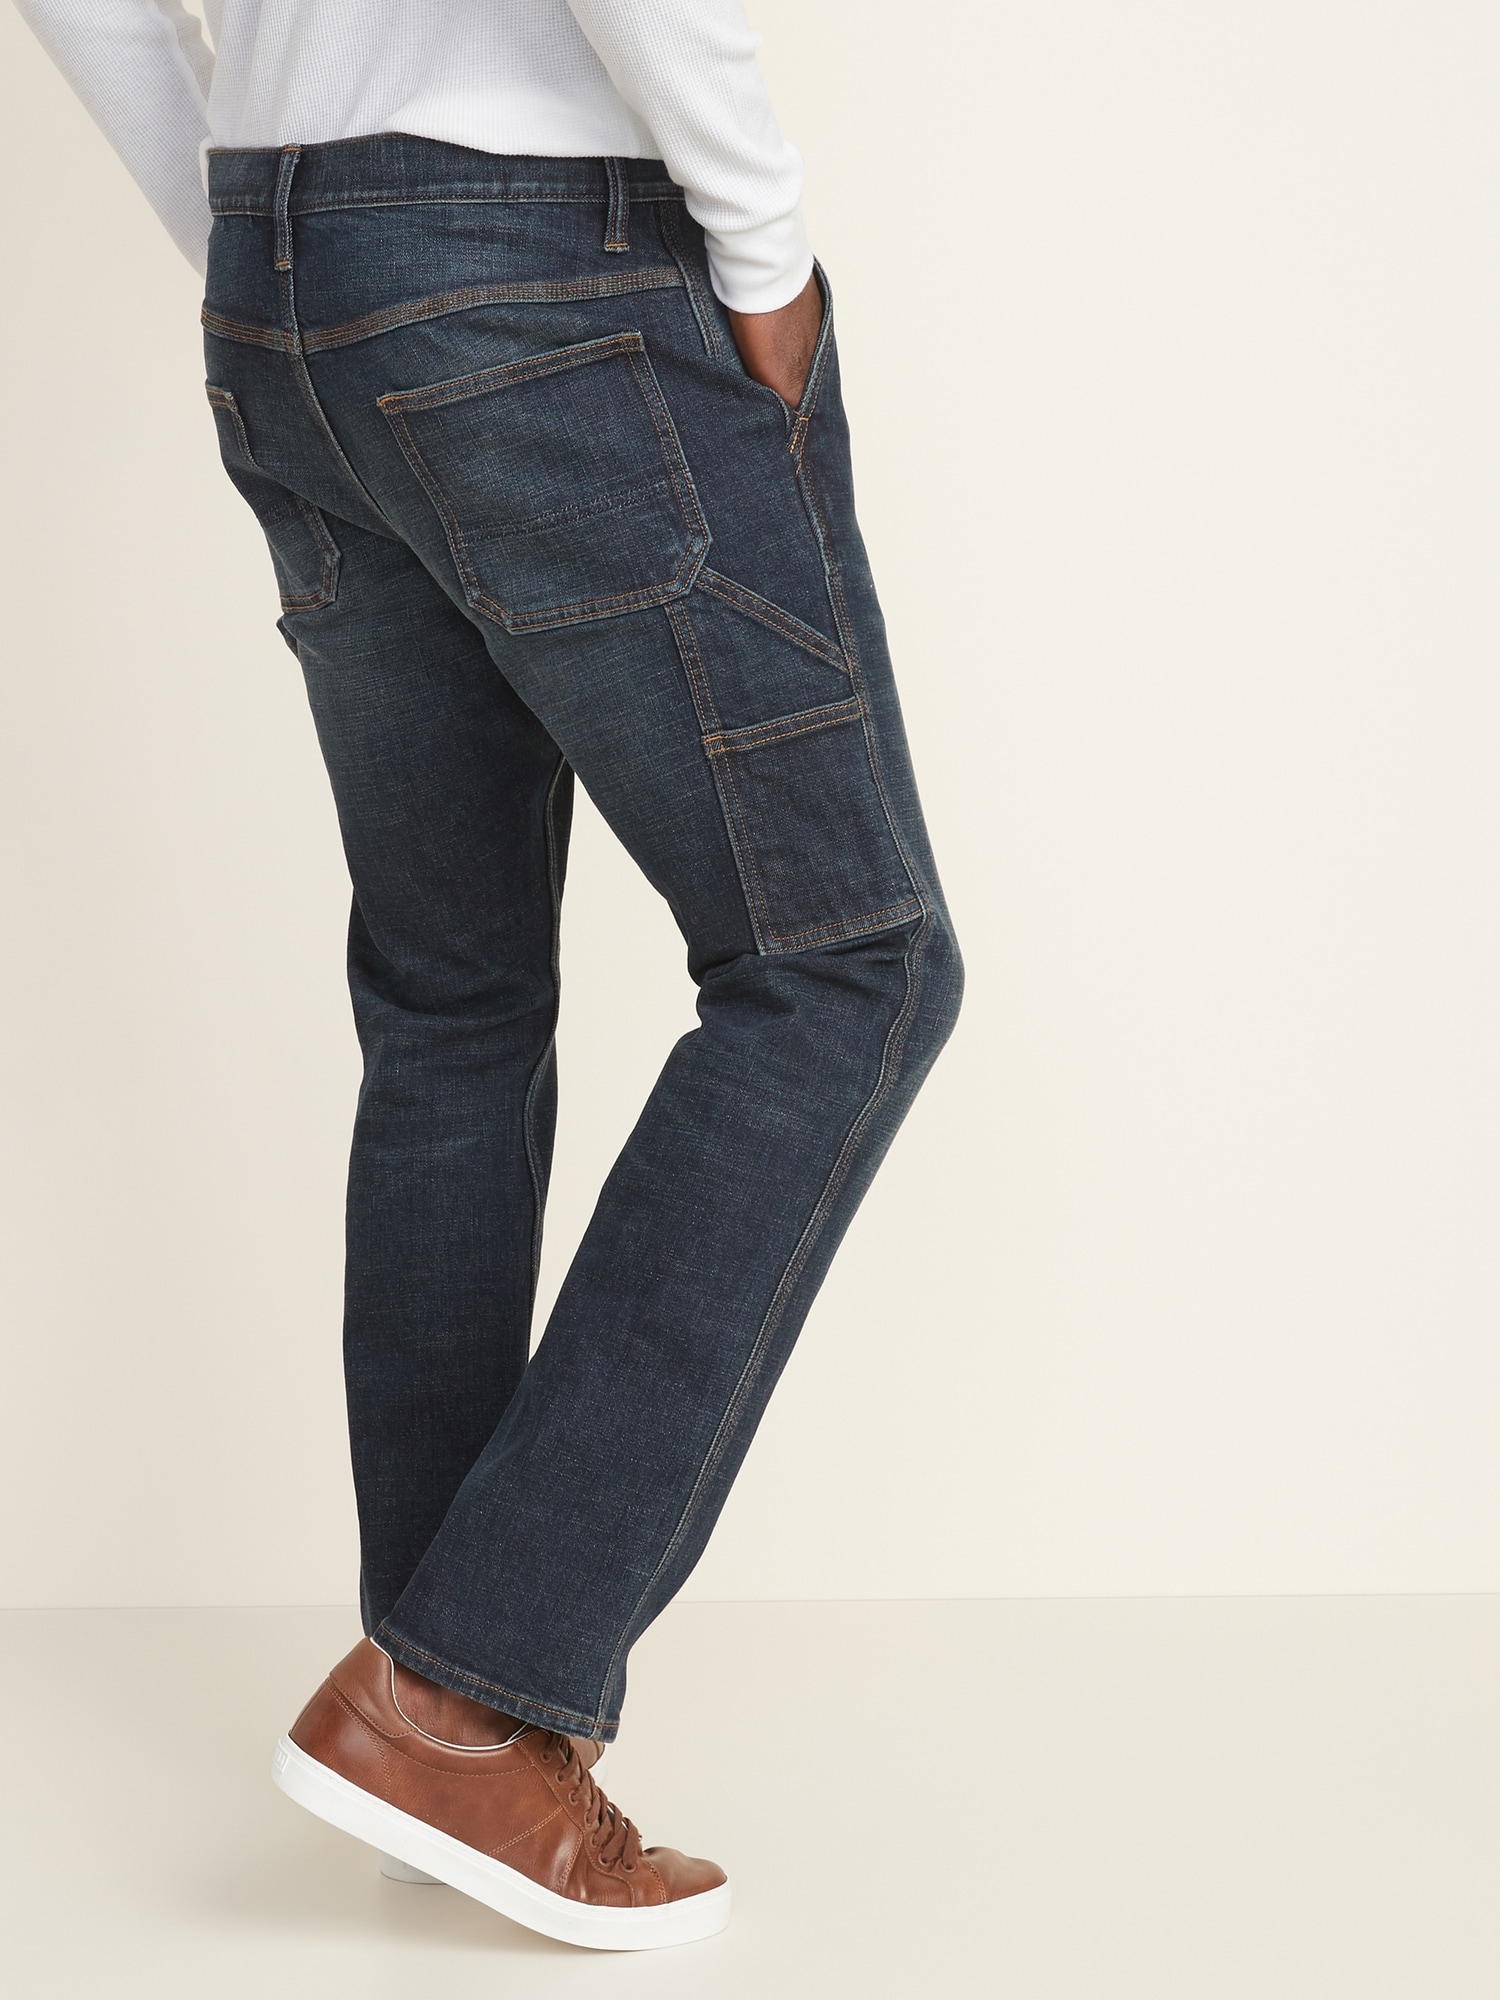 best men's jeans for large thighs